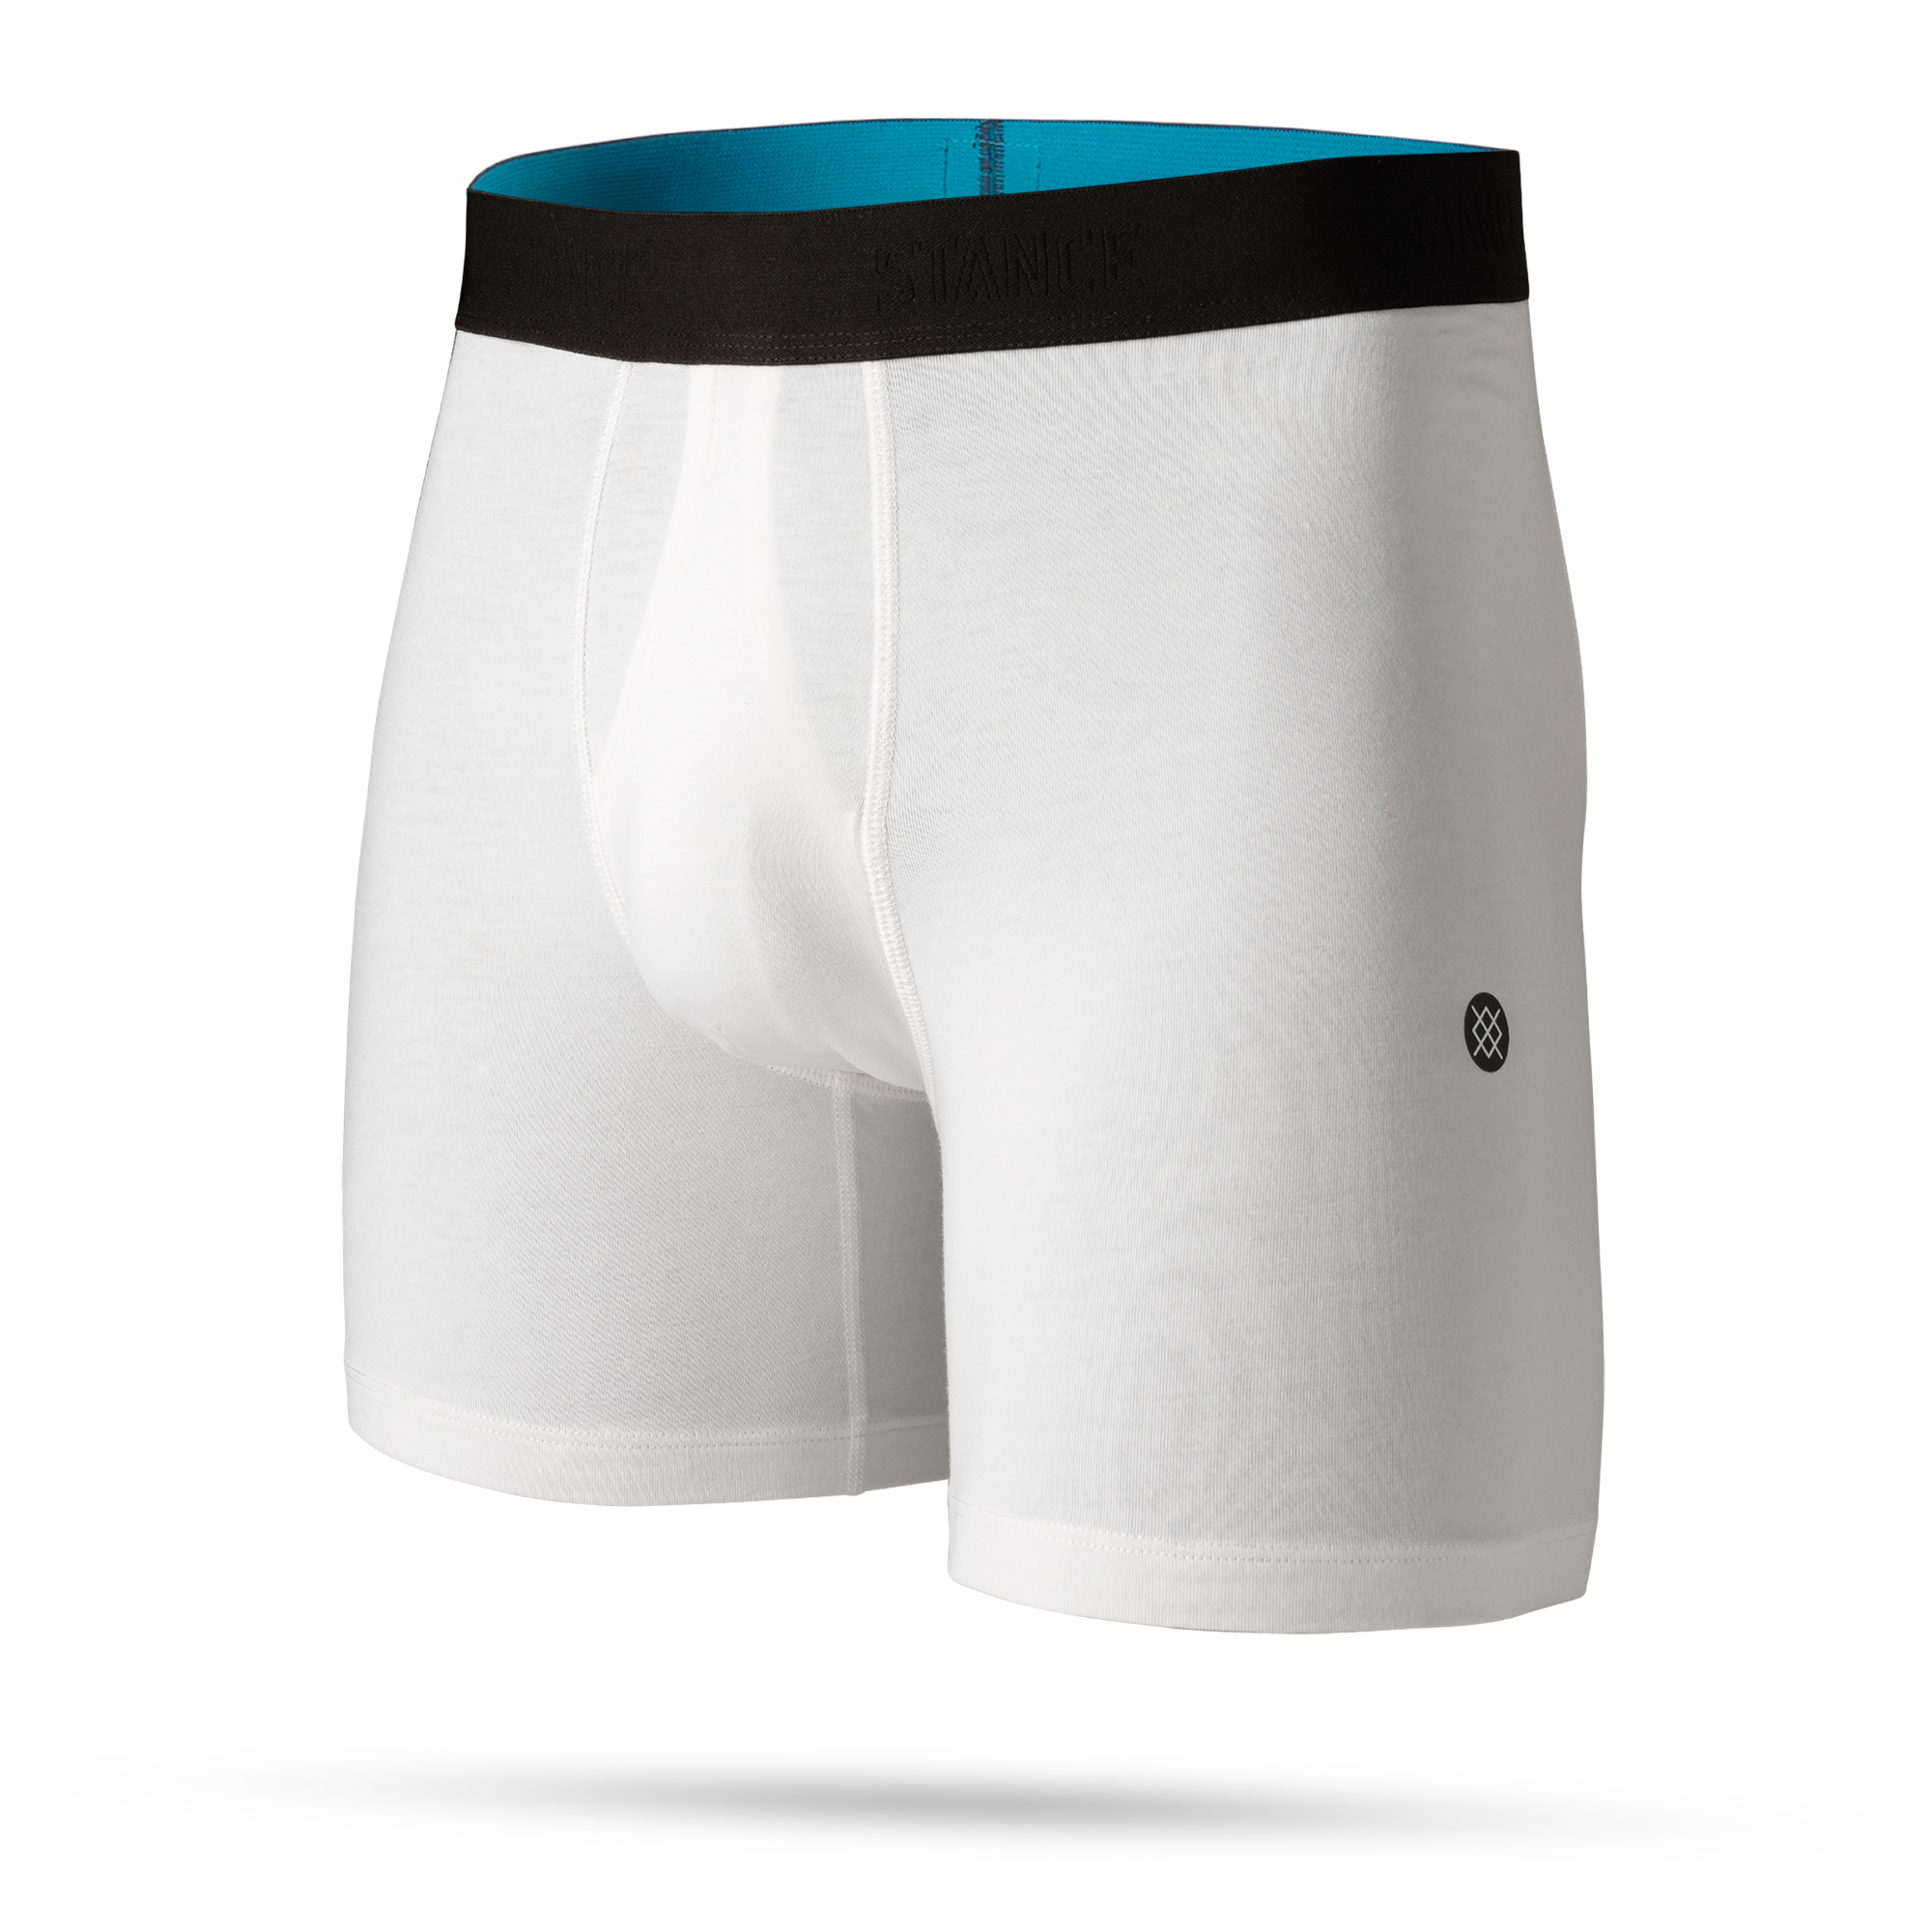 Stance Wholester Rickter Boxer Brief